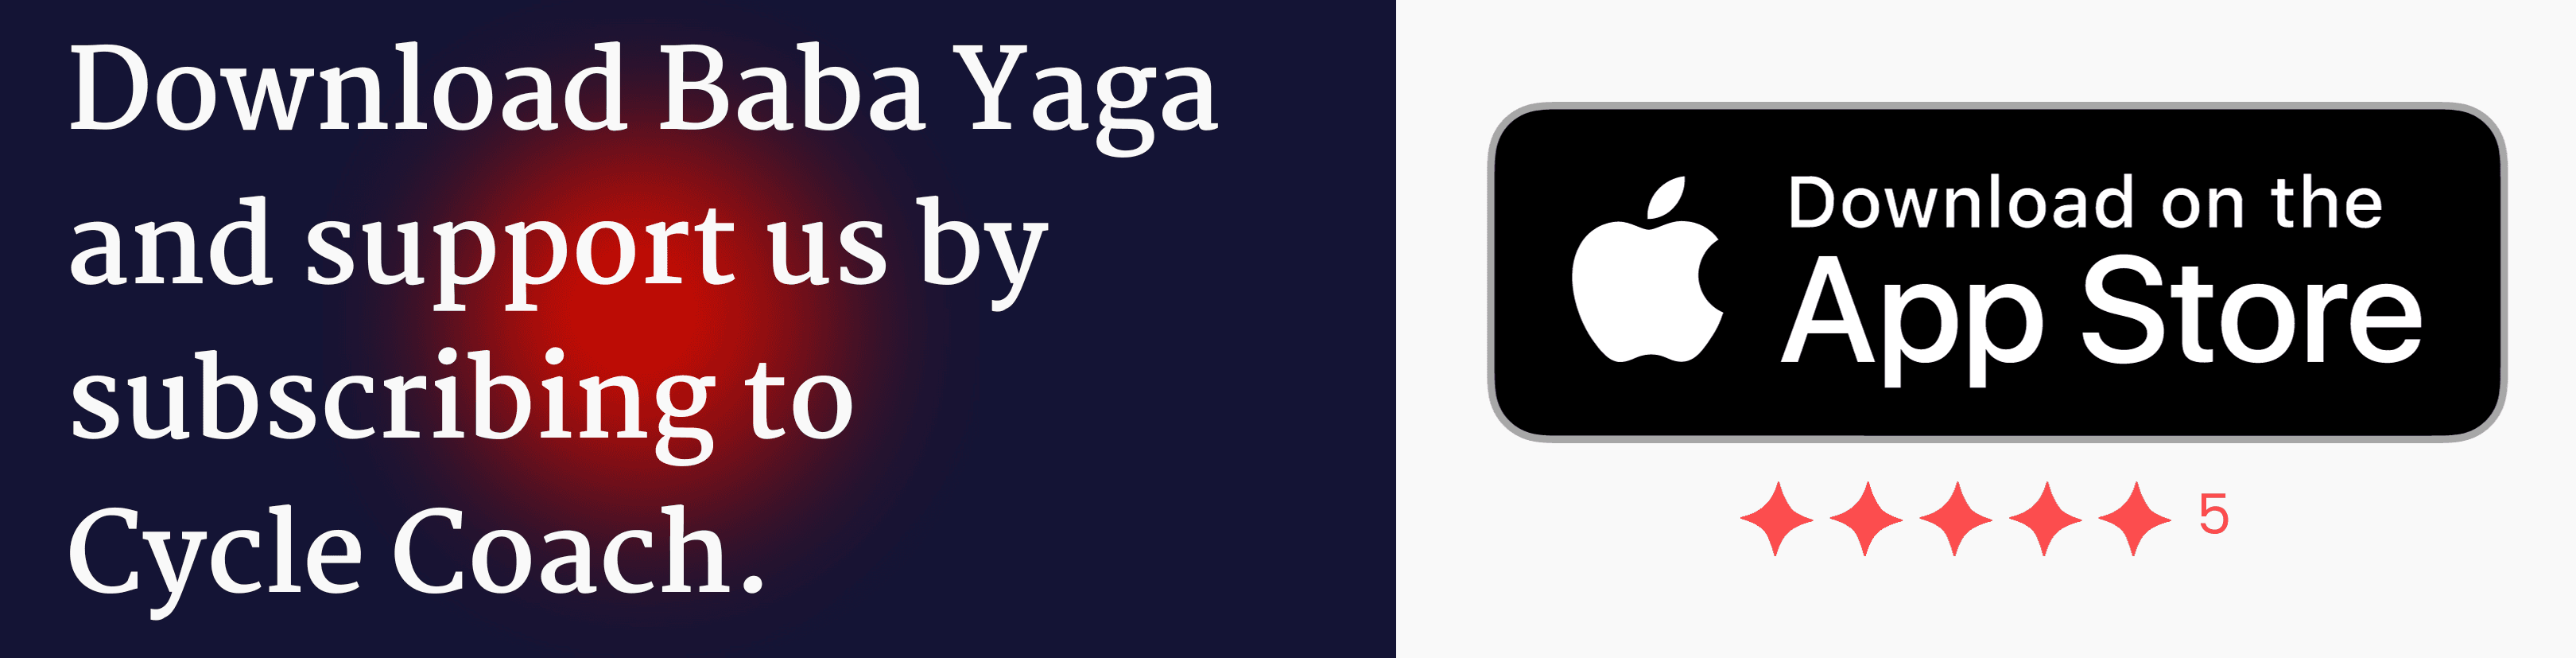 Download Baba Yaga and support us by subscribing to Cycle Coach.